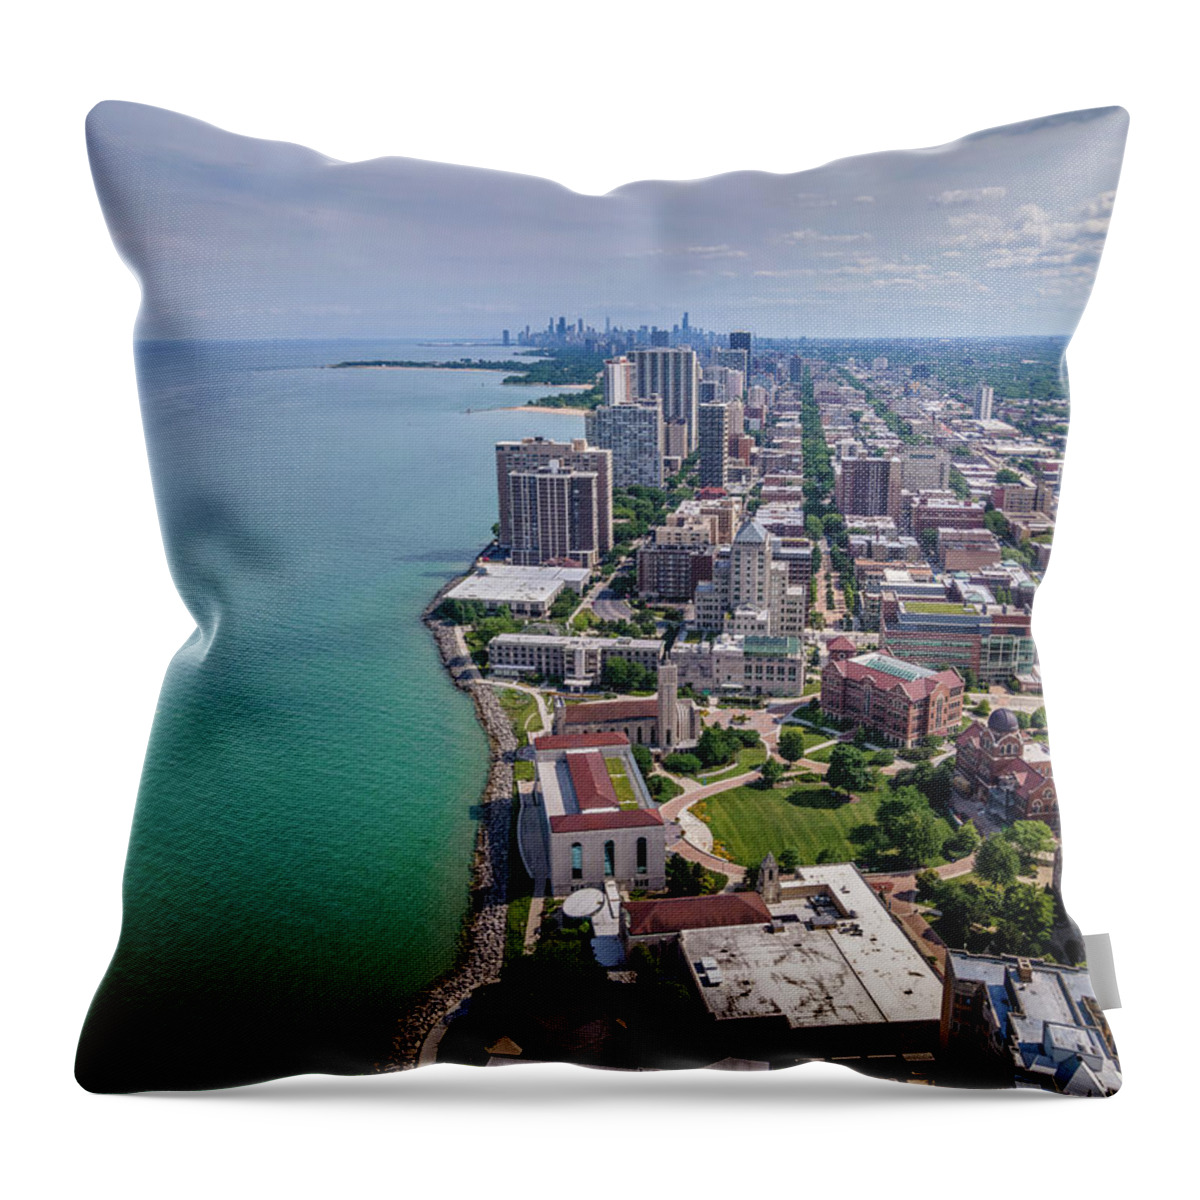 Loyola Throw Pillow featuring the photograph Loyola University Chicago - 2 by Bobby K